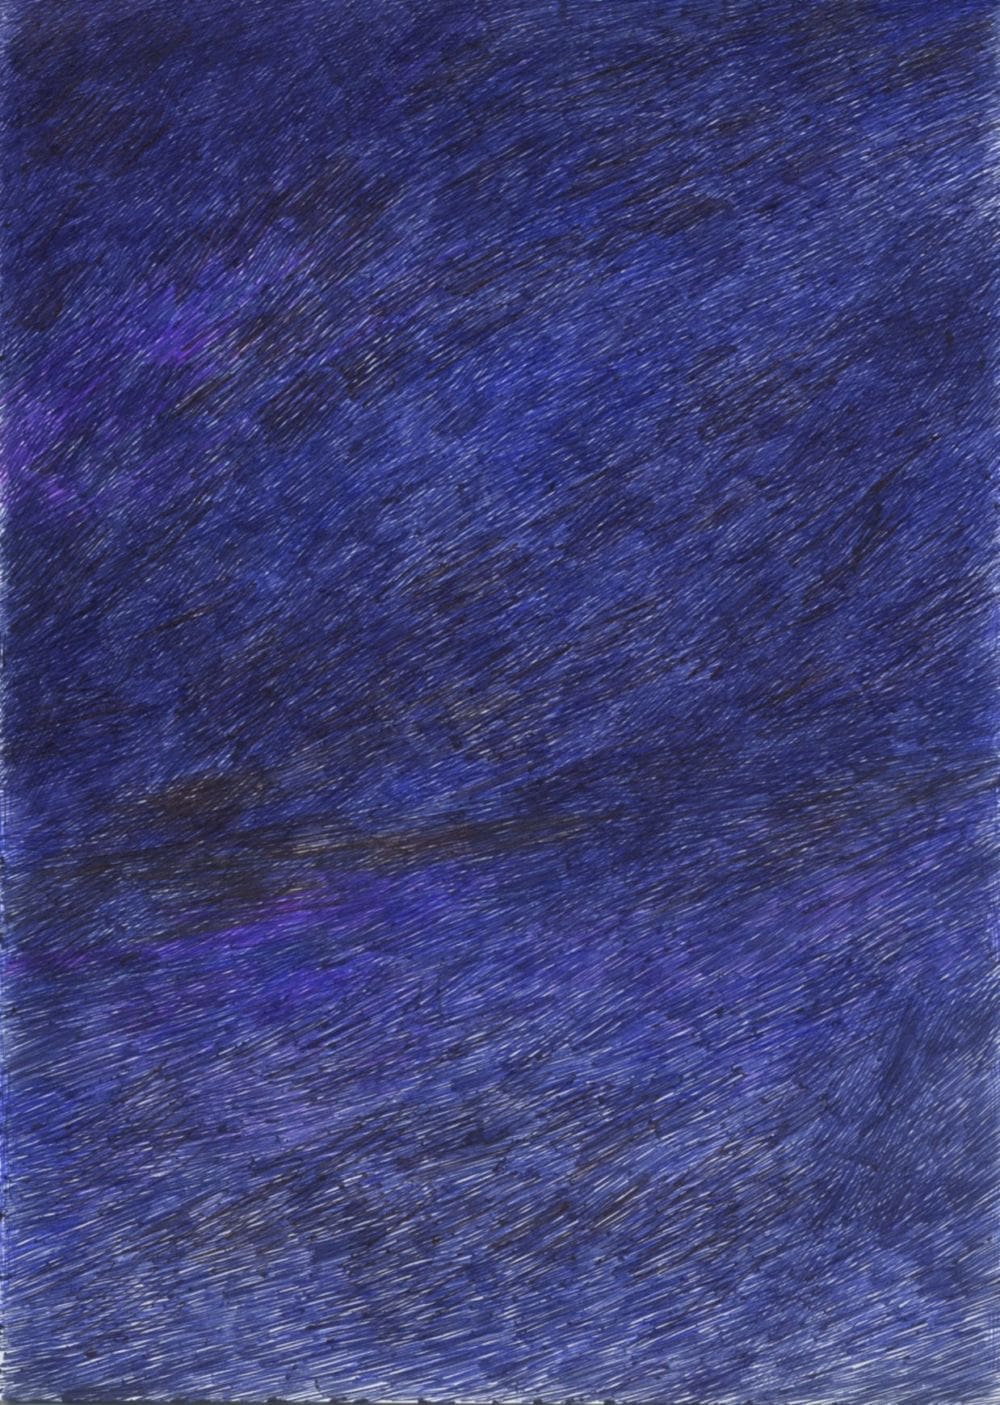 Untitled (Senza titolo), 2013, Ballpoint pen on paper, 11-1/2 x 8-1/4 inches